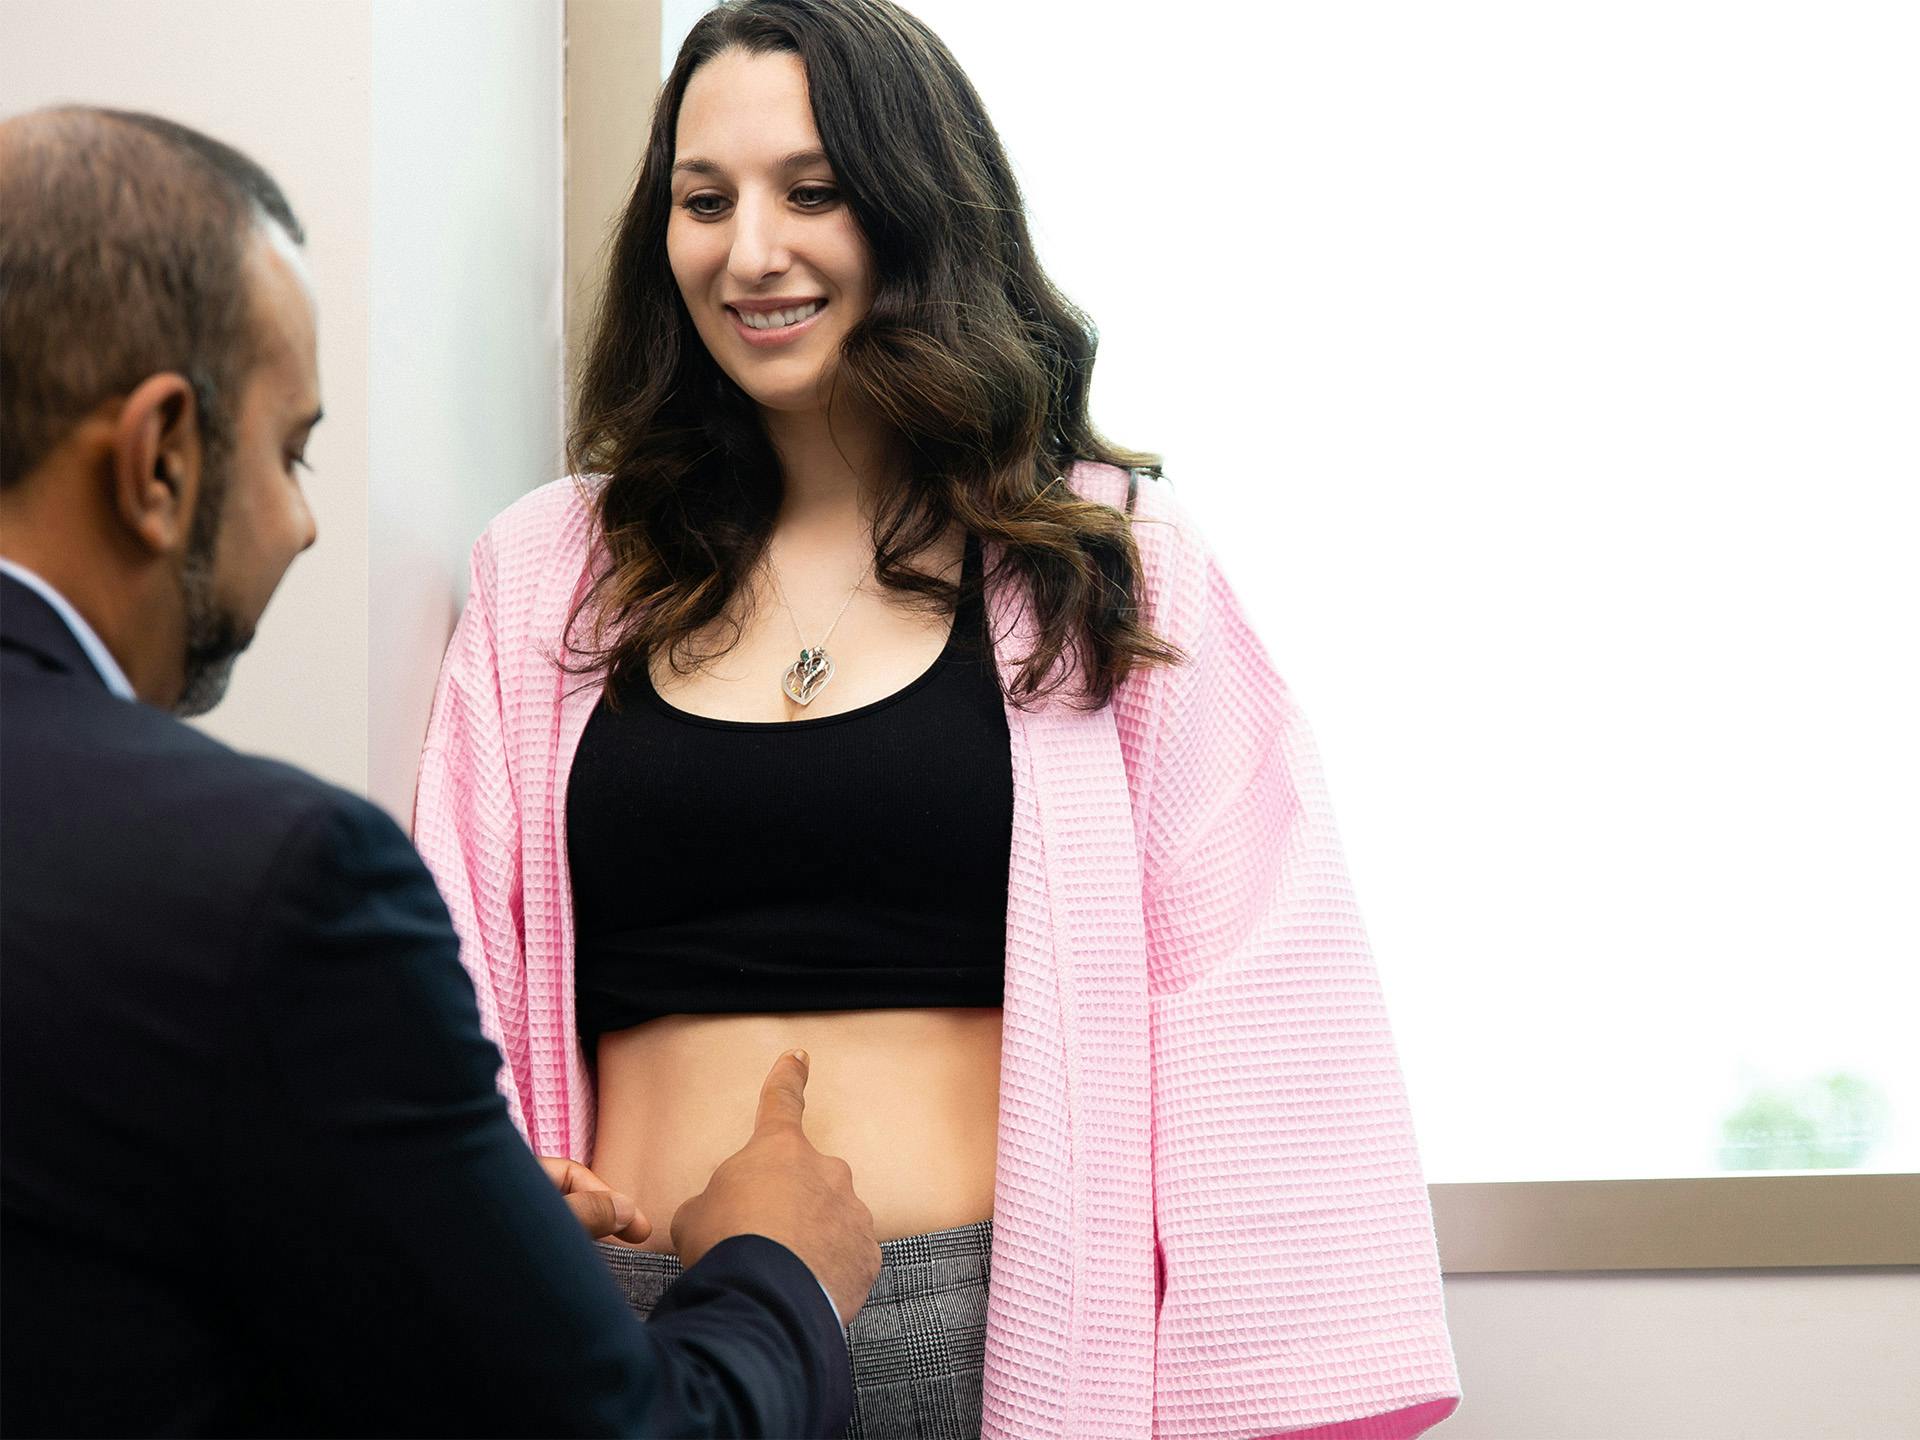 Woman having her stomach checked by doctor during consultation